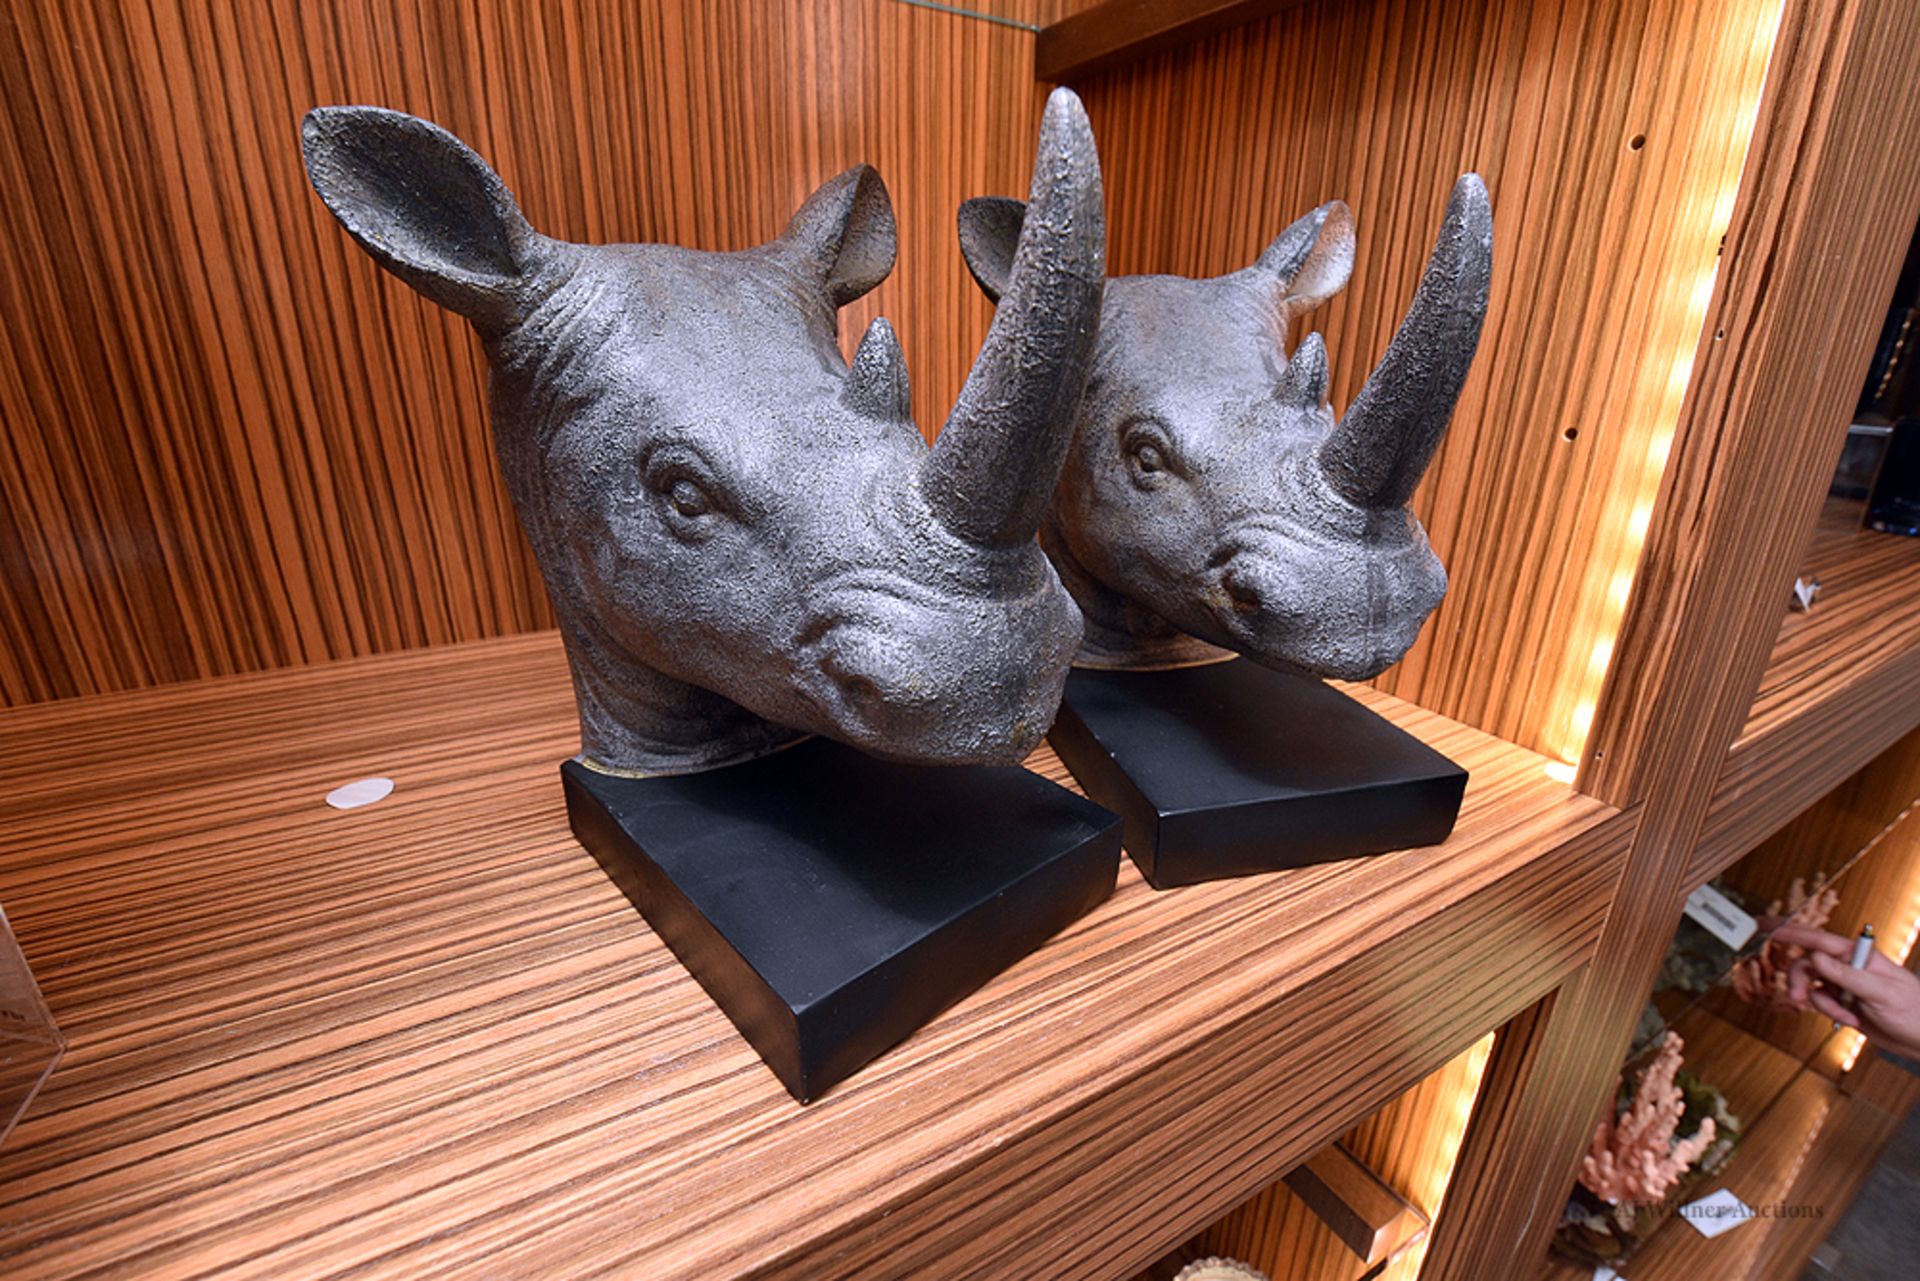 Pair of Rhino Book Ends